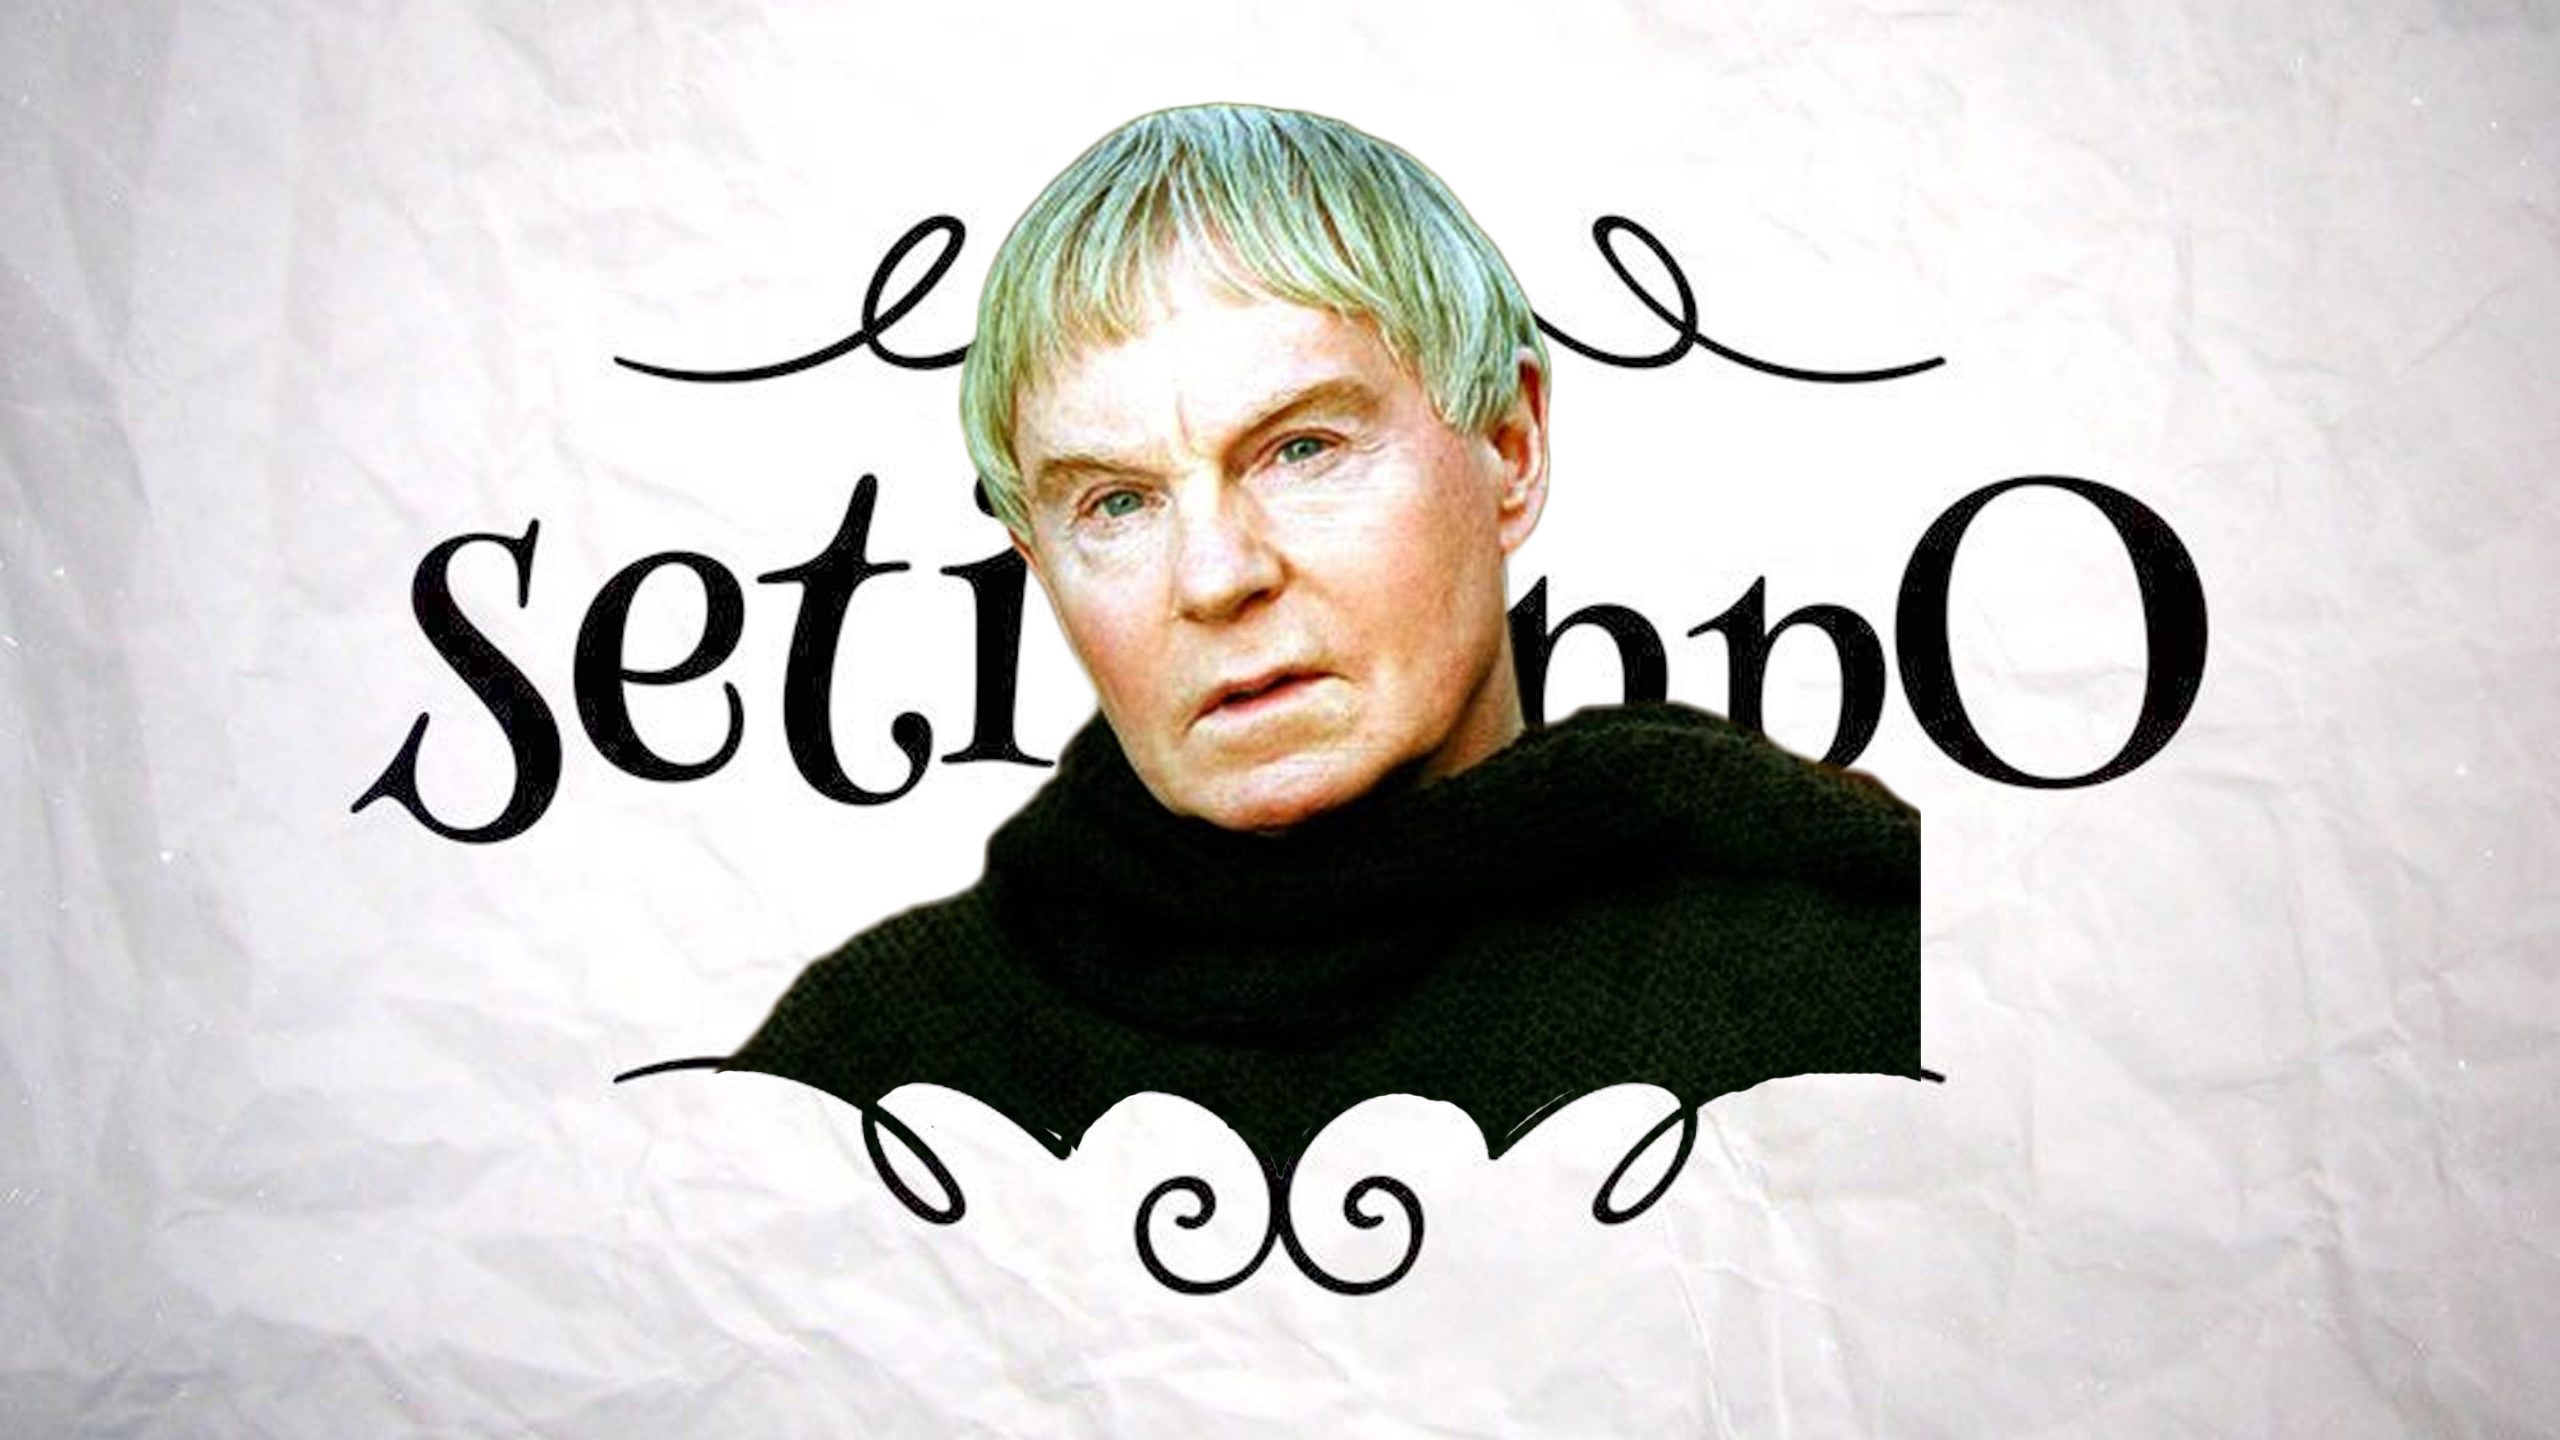 What’s The Opposite Of Cadfael?